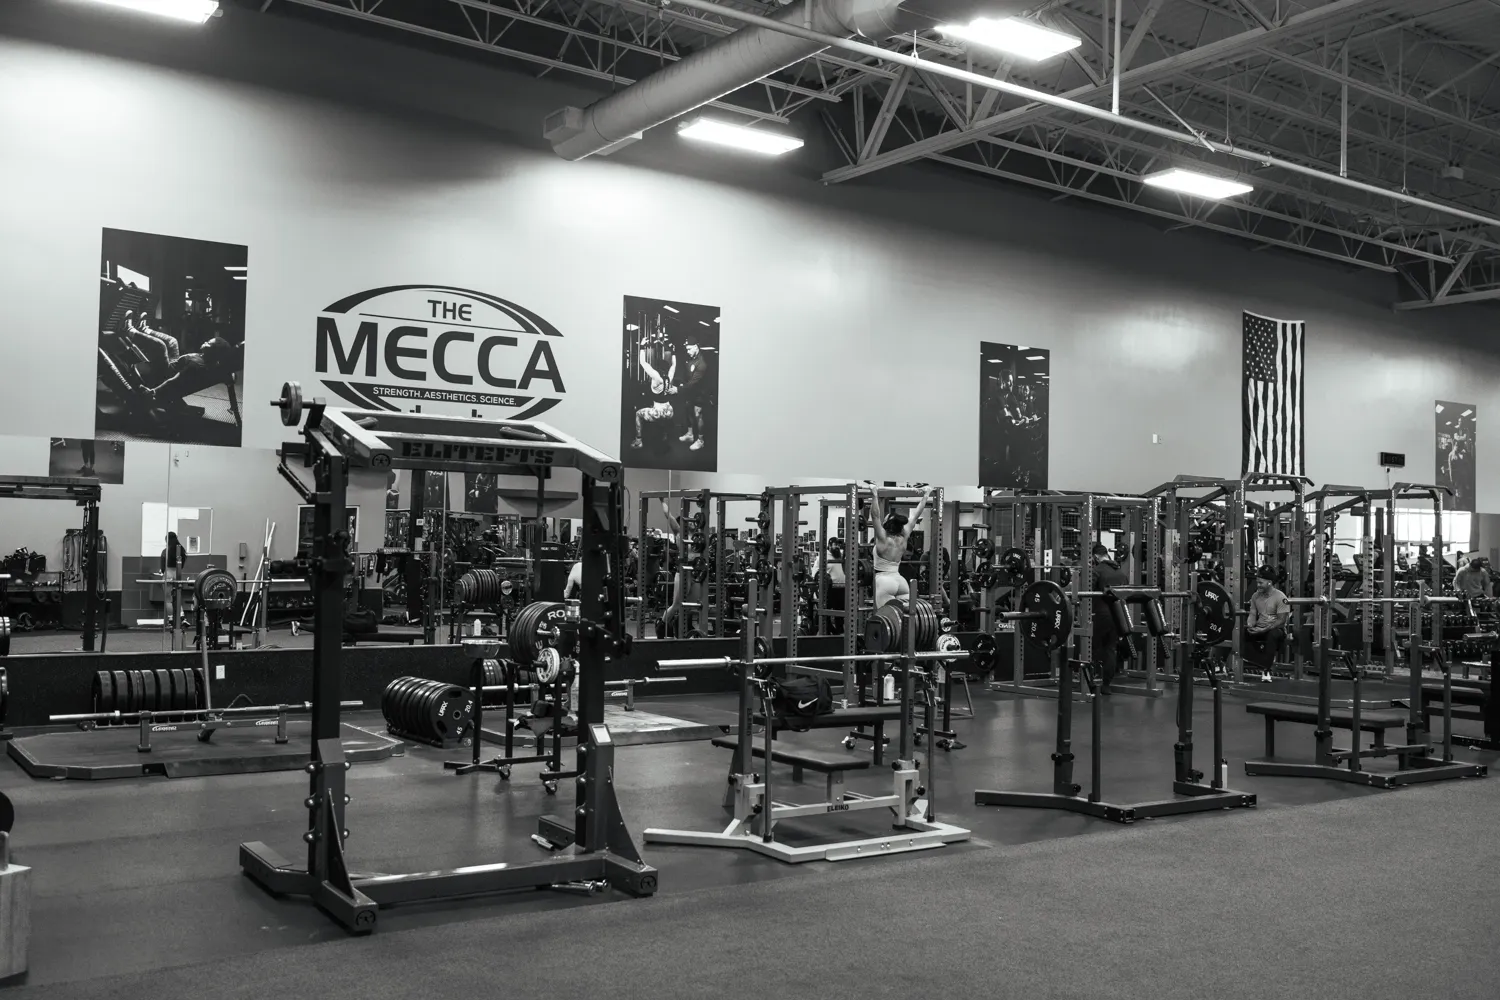 The interior of The Mecca Gym in Boise Idaho